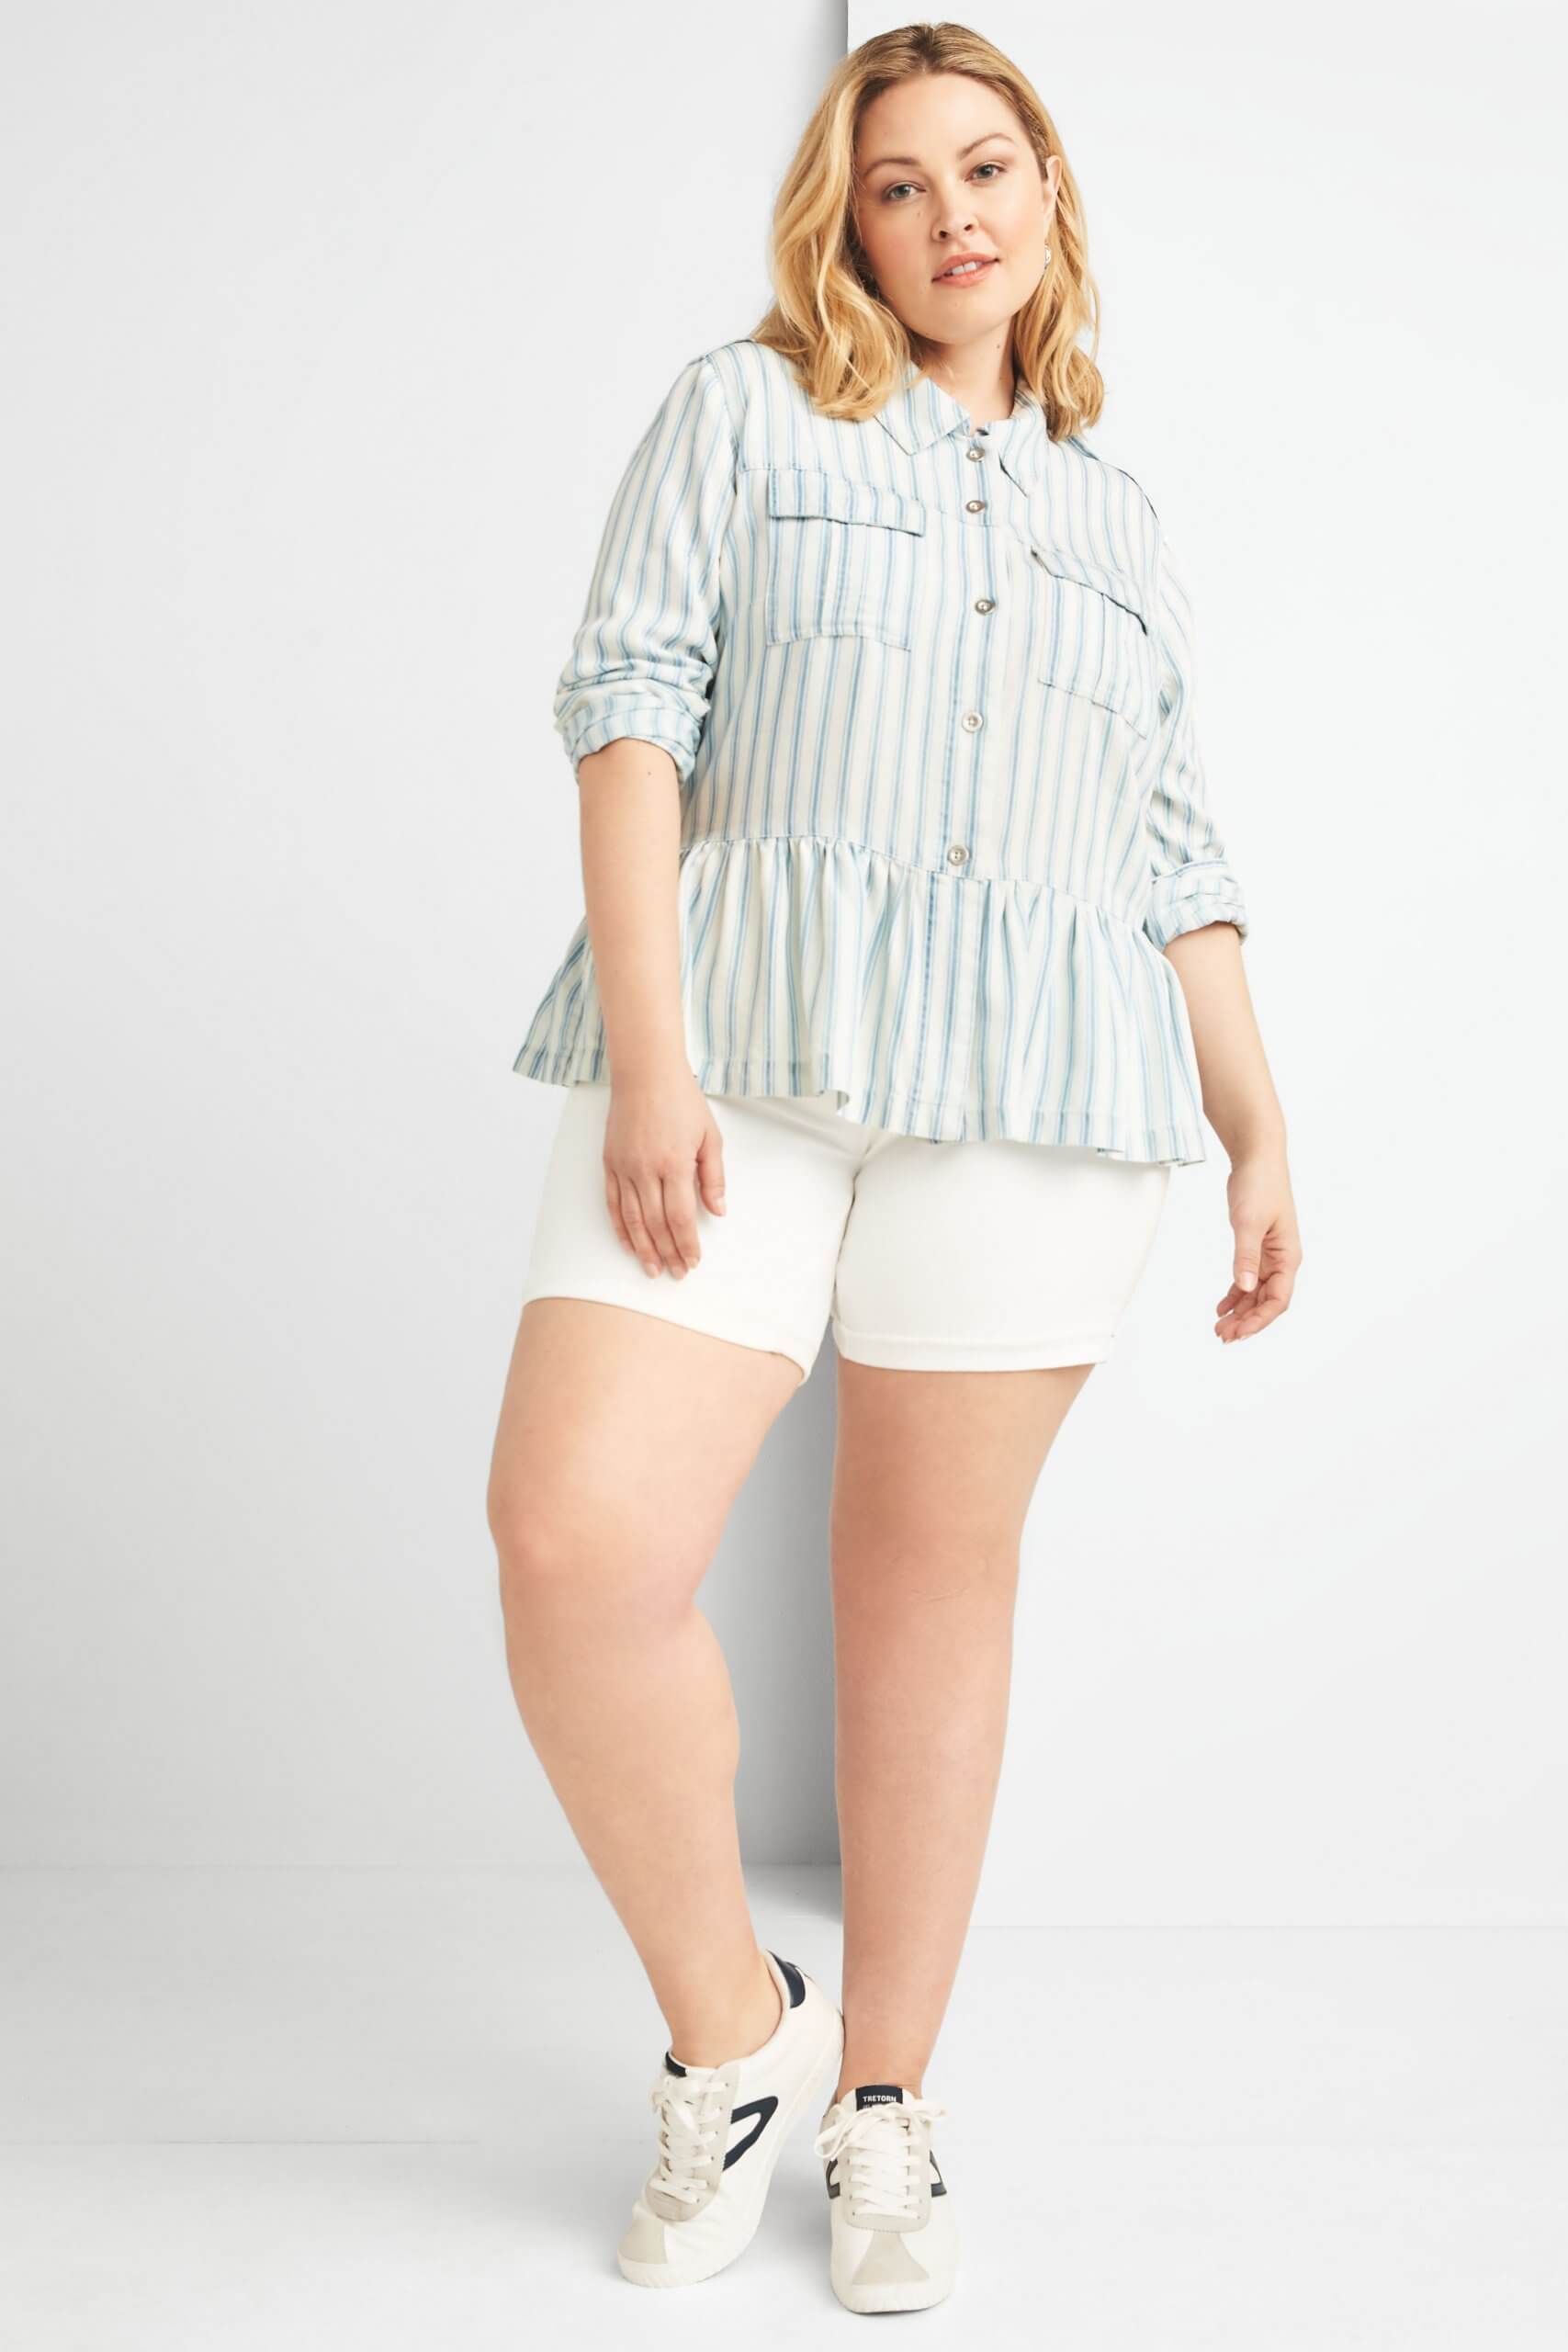 What is Plus Size Clothing? The Stitch Fix Approach